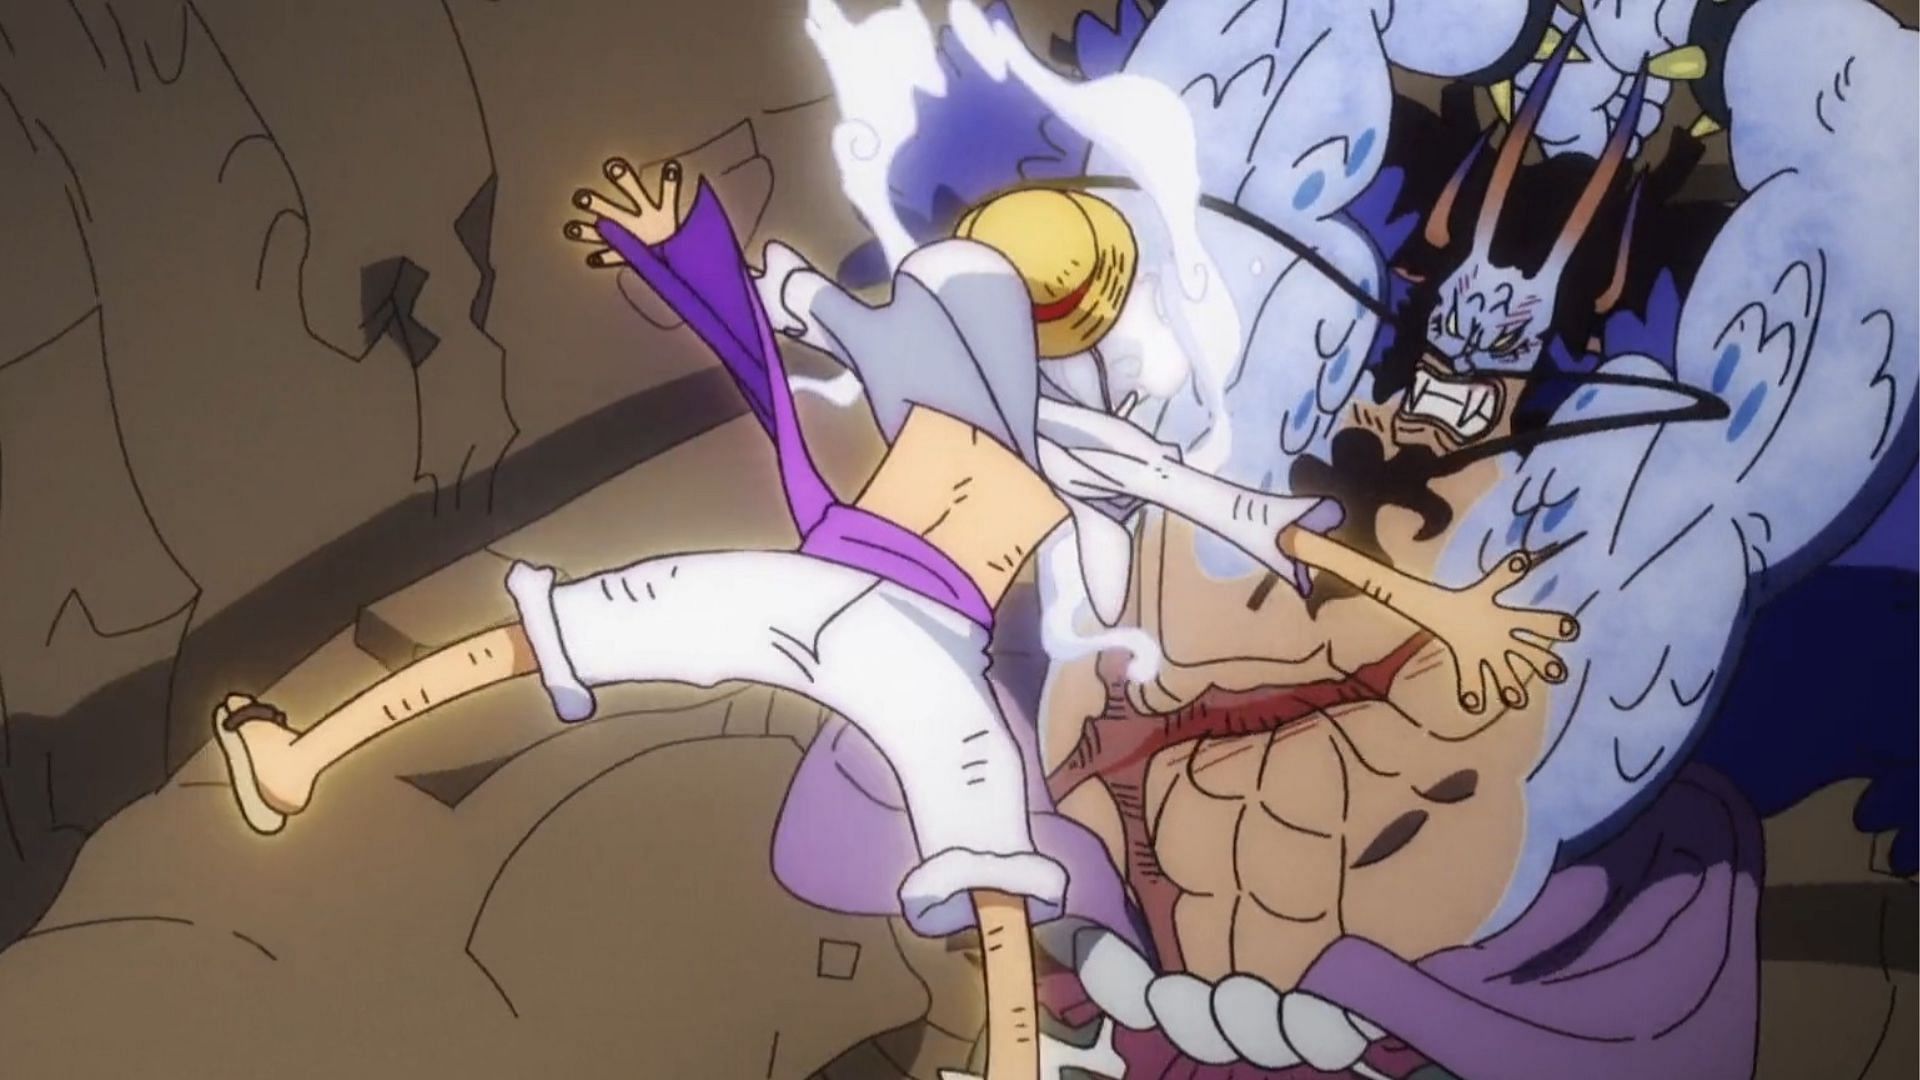 Gear 5 Luffy vs Kaido as seen in the preview for One Piece episode 1072 (Image via Toei Animation)